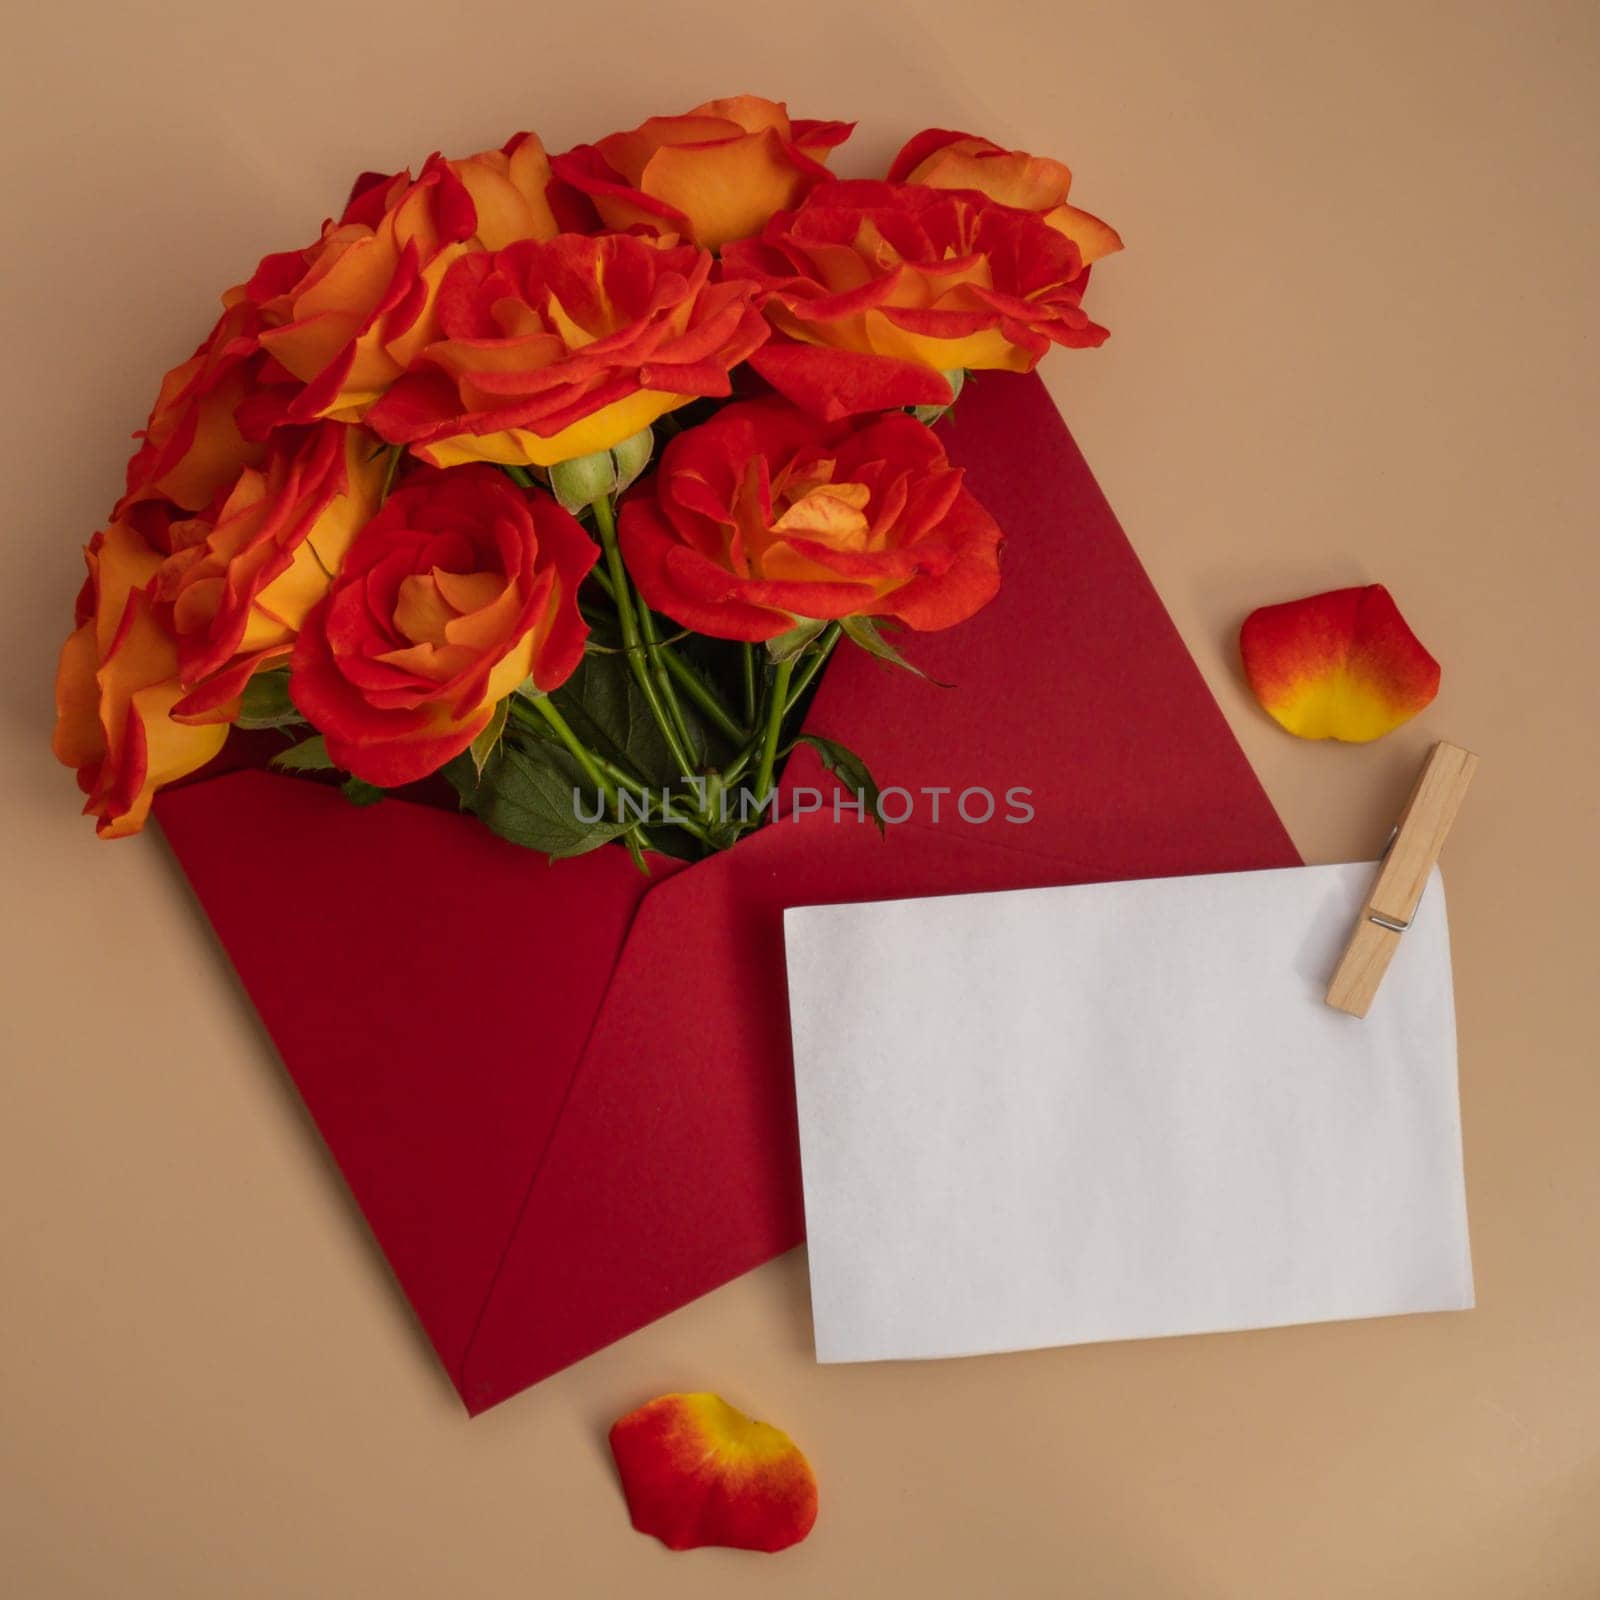 Beautiful red roses flowers in postal red envelope on neutral beige background, empty paper note copy space for text, spring time, greeting card for holiday. Flower delivery. Delicate red yellow roses. Minimal trendy composition. Romantic pastel flowers by anna_stasiia